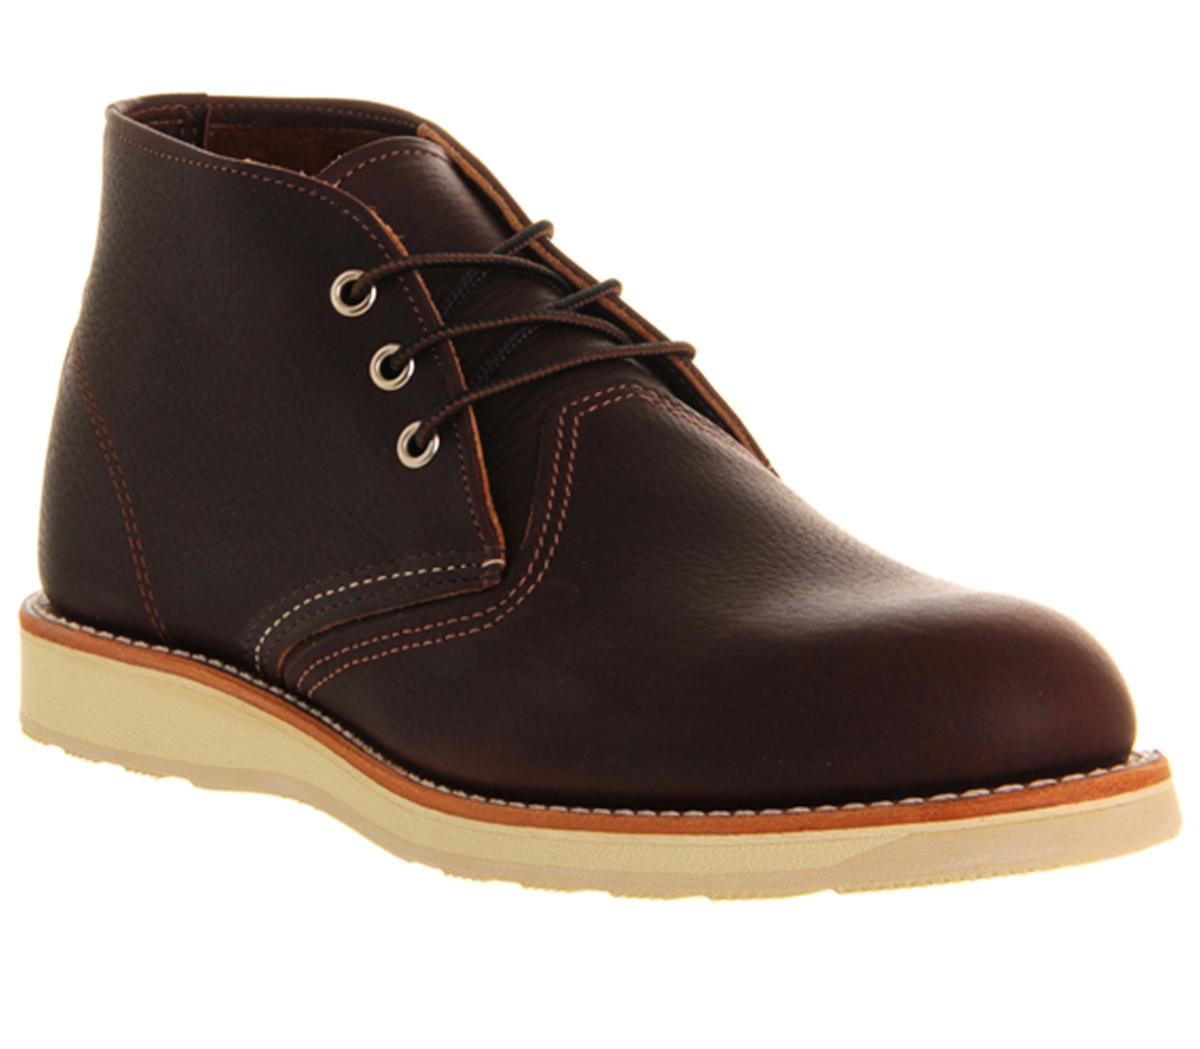 Redwing Work Chukka Boots Brown Leather - Men’s Boots